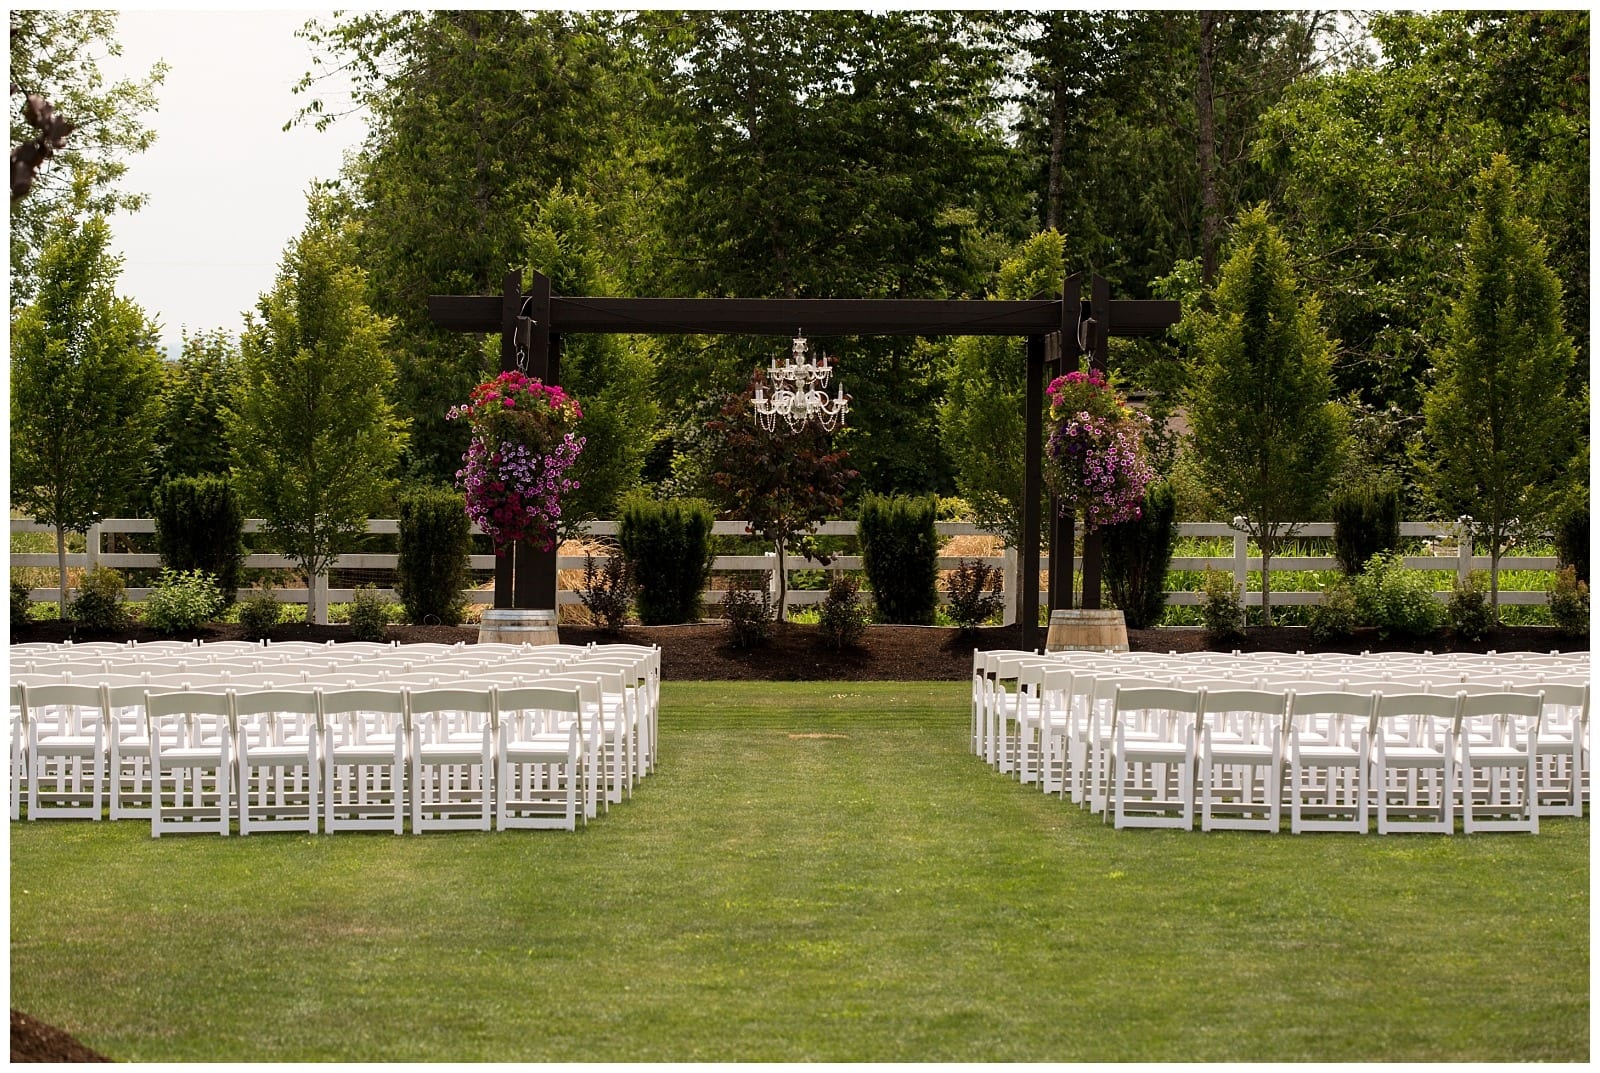 30 awesome wedding venues in Washington state. 17 of our favorites and 13 bucket list event venues from all over Washington state. Seattle, Snohomish and beyond.